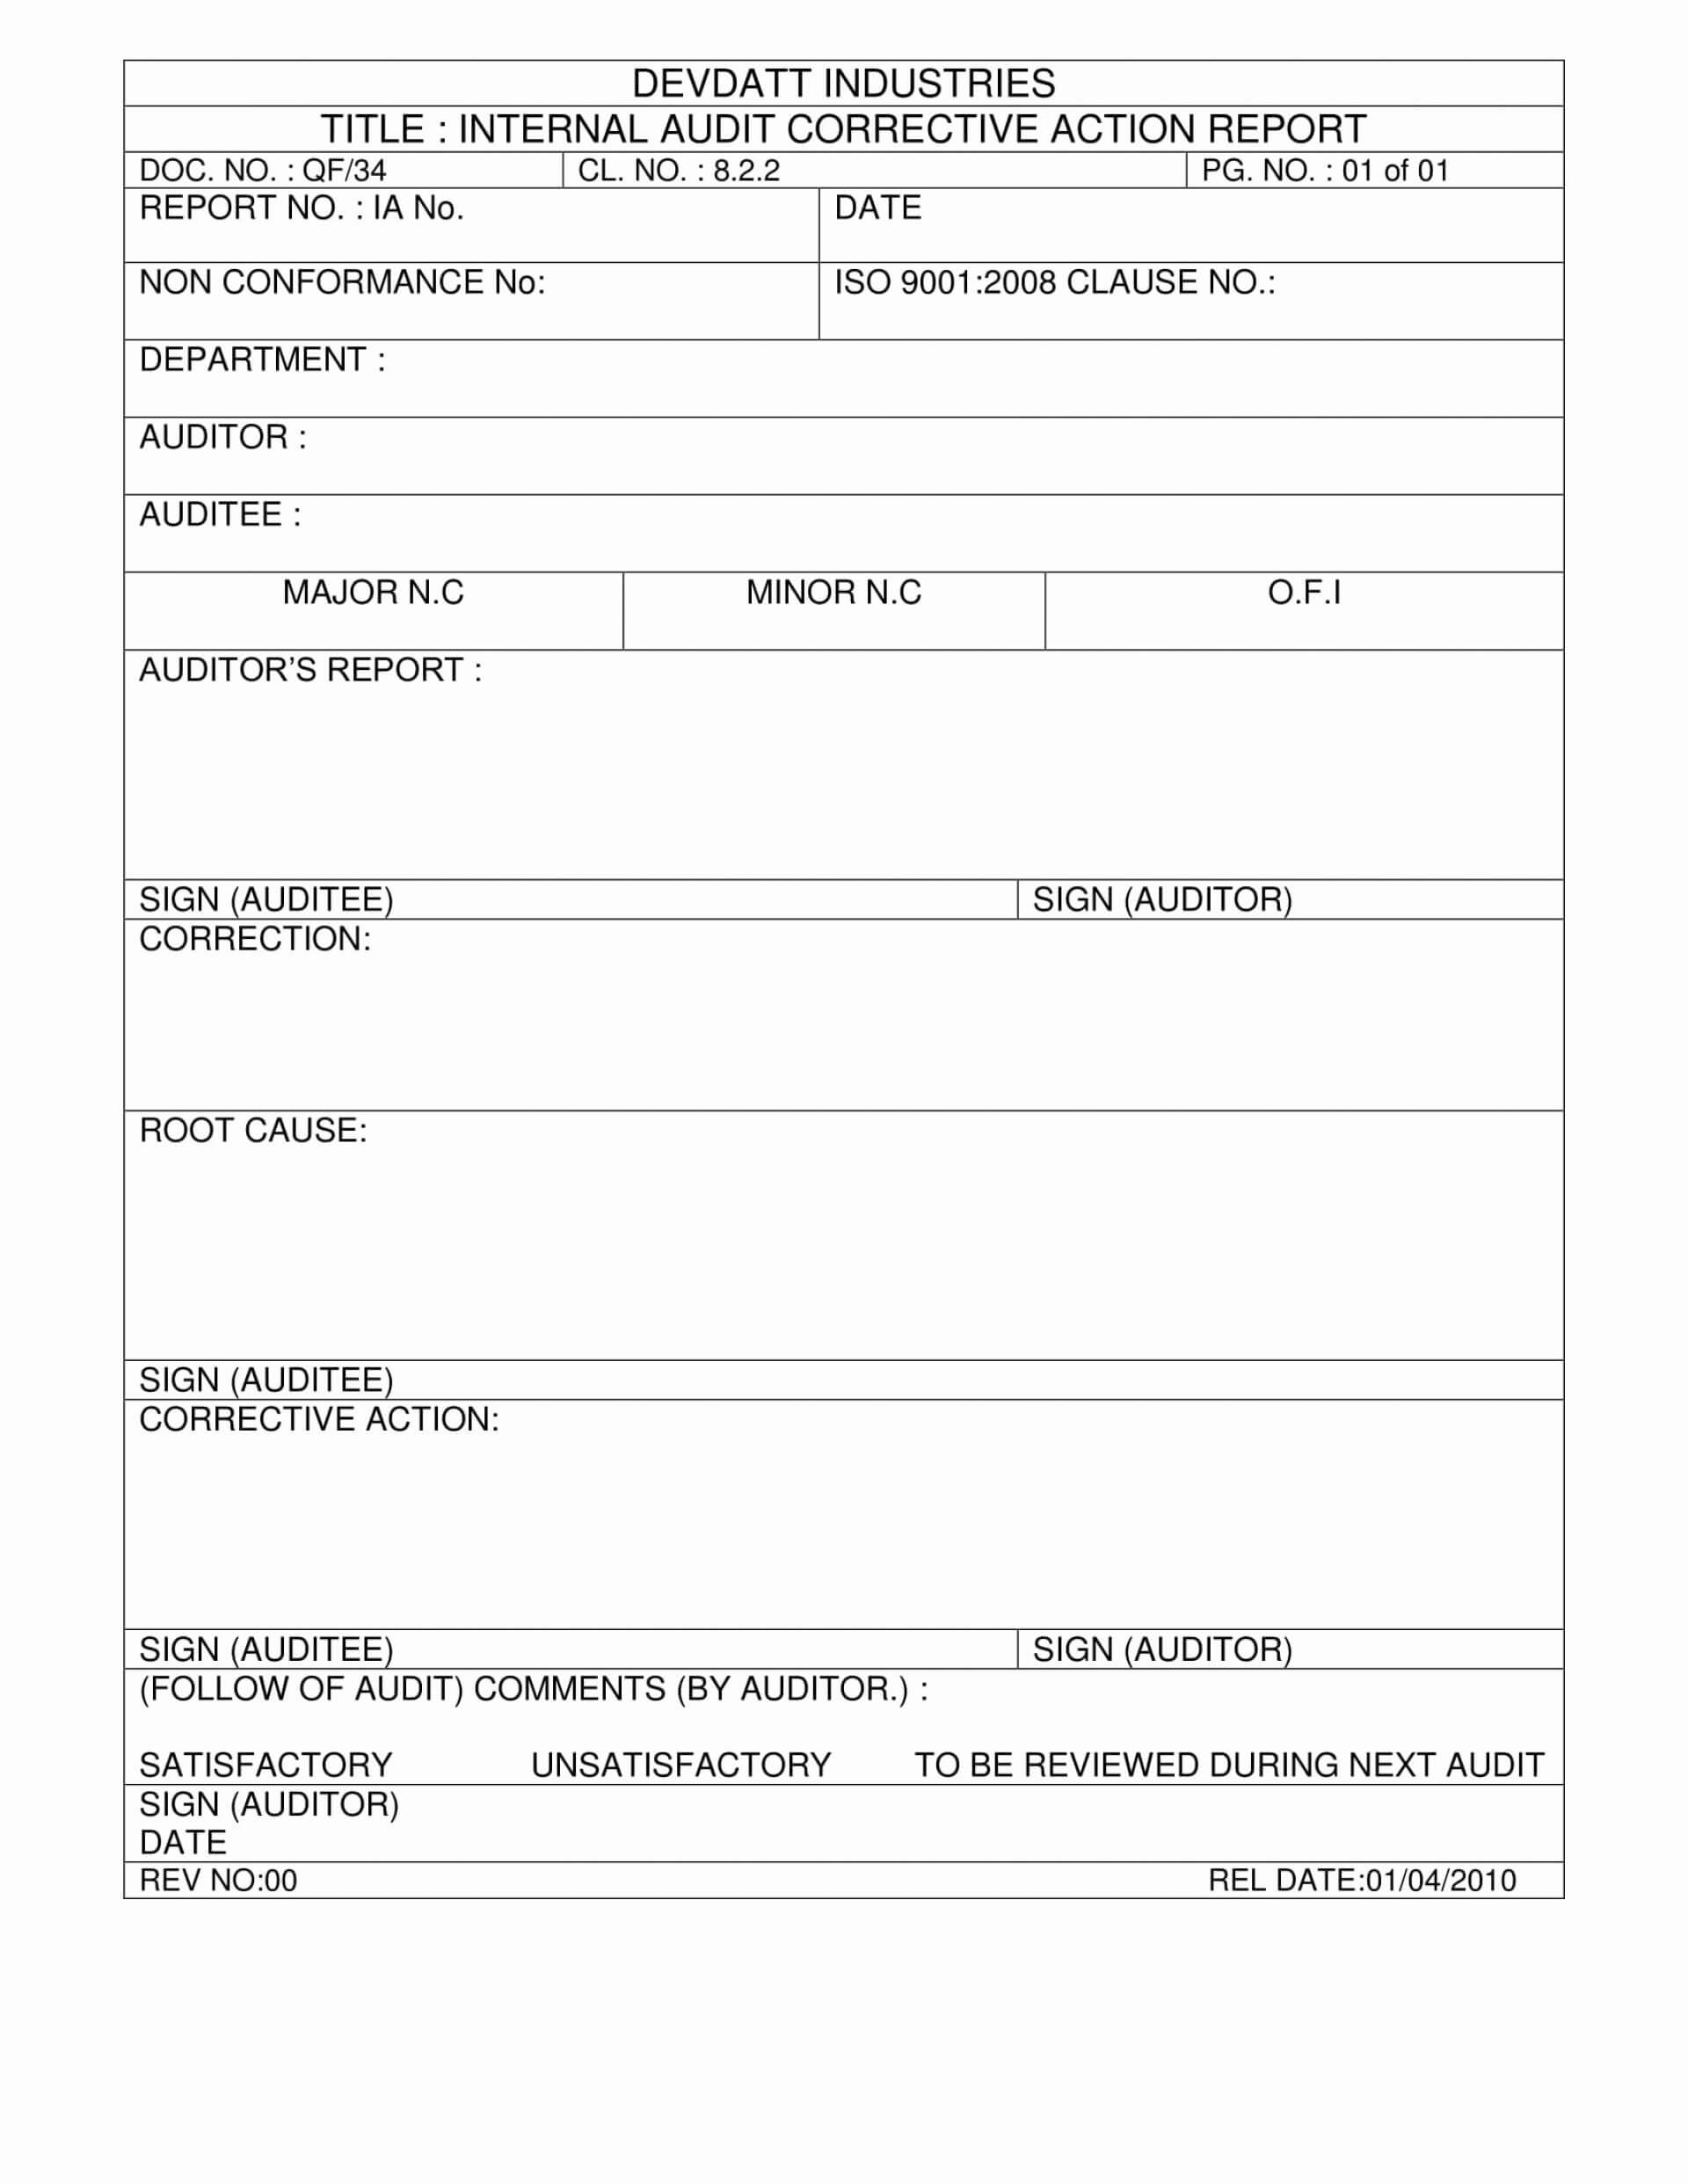 014 Corrective Action Form Template Word Ideas New Non Inside Non Conformance Report Form Template